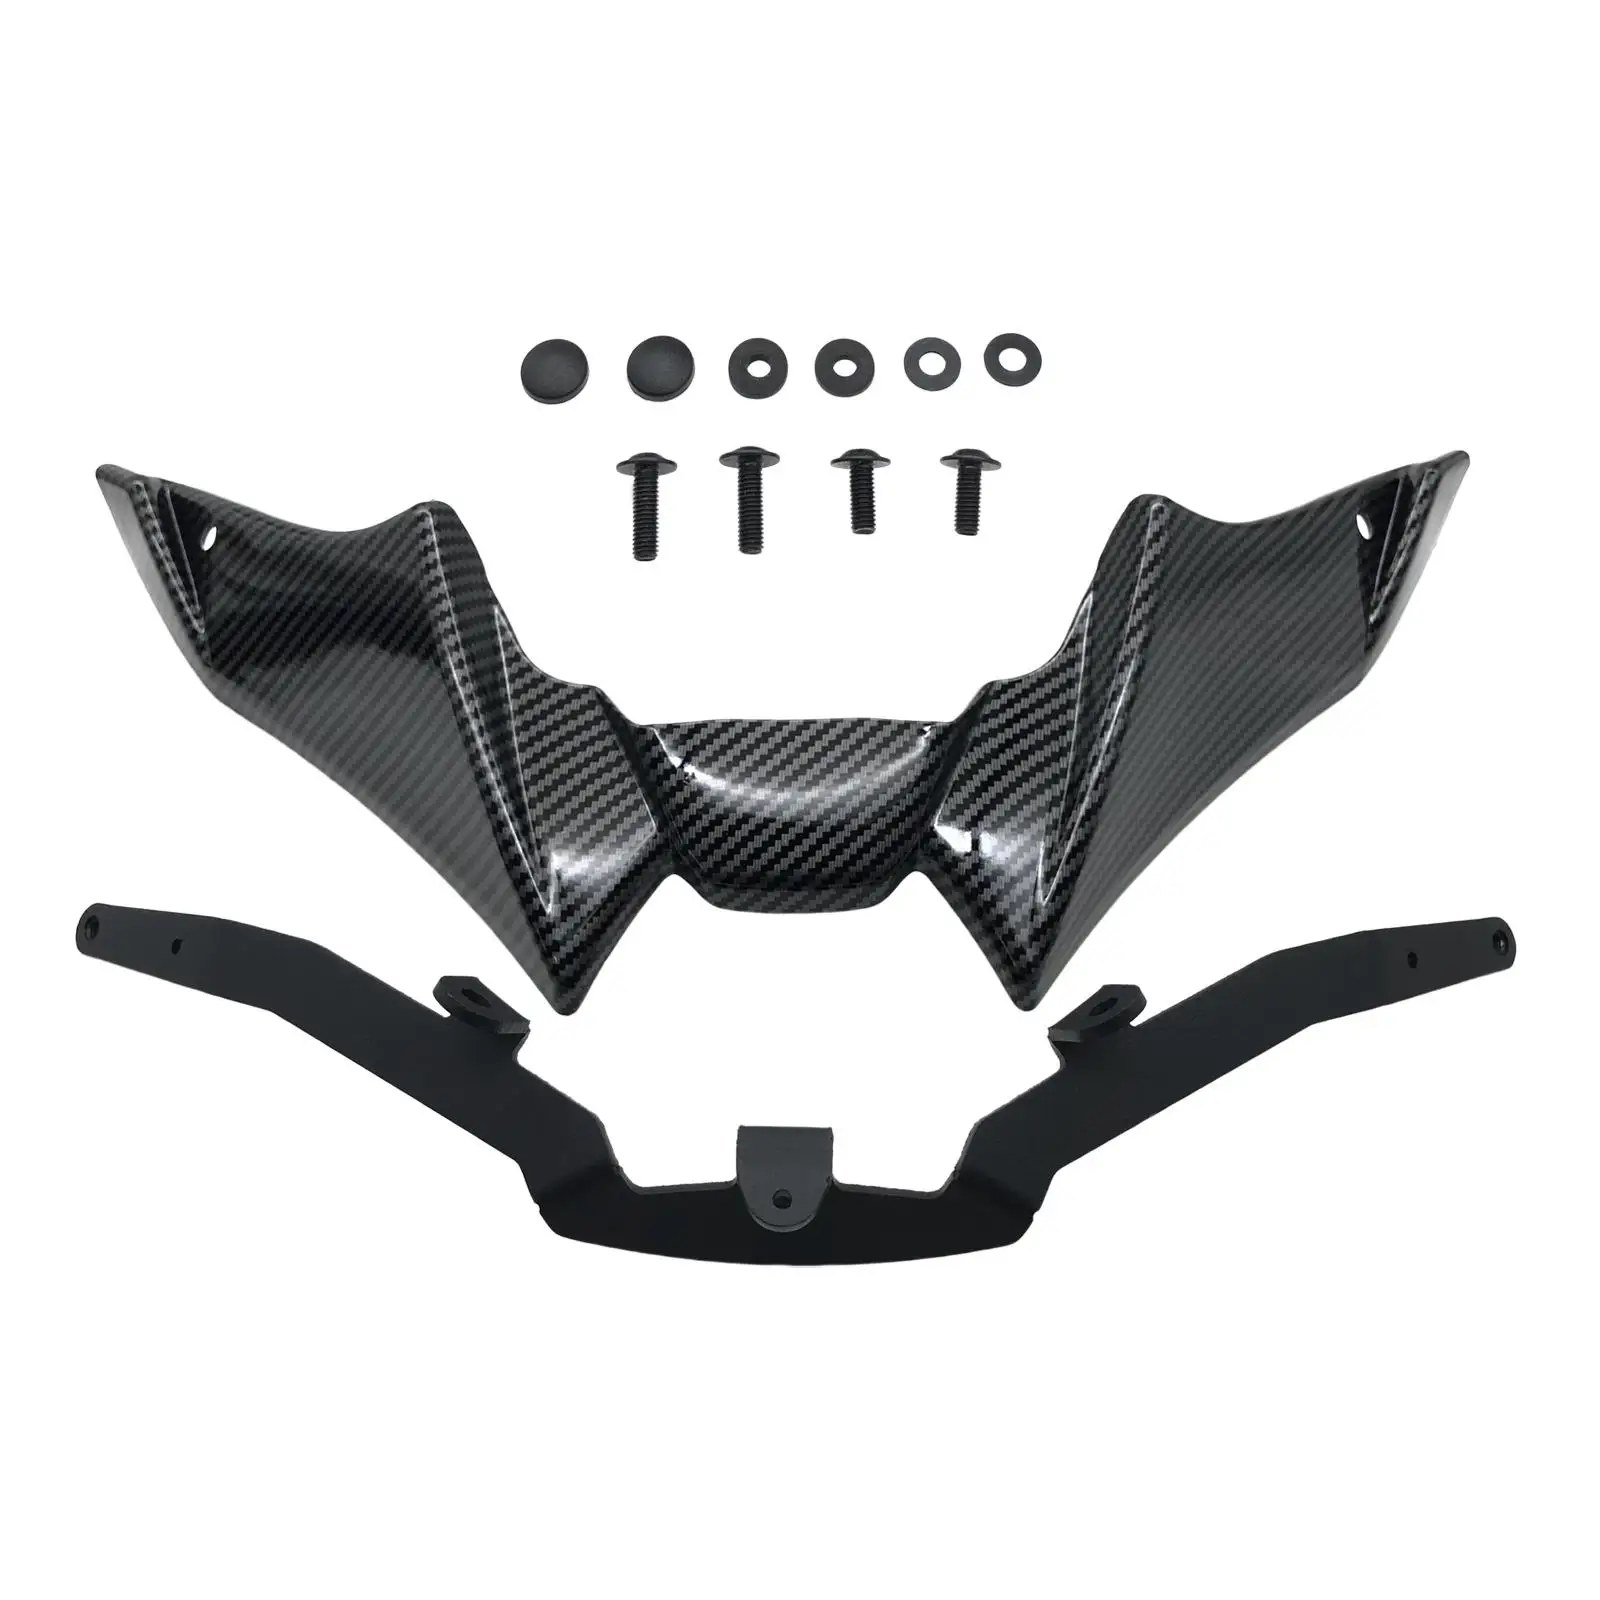 Front Headlight Bracket Replaces Upper Fairing Stay Bracket Front Nose Spoiler Wing Fairing Cowling for MT-09 V3